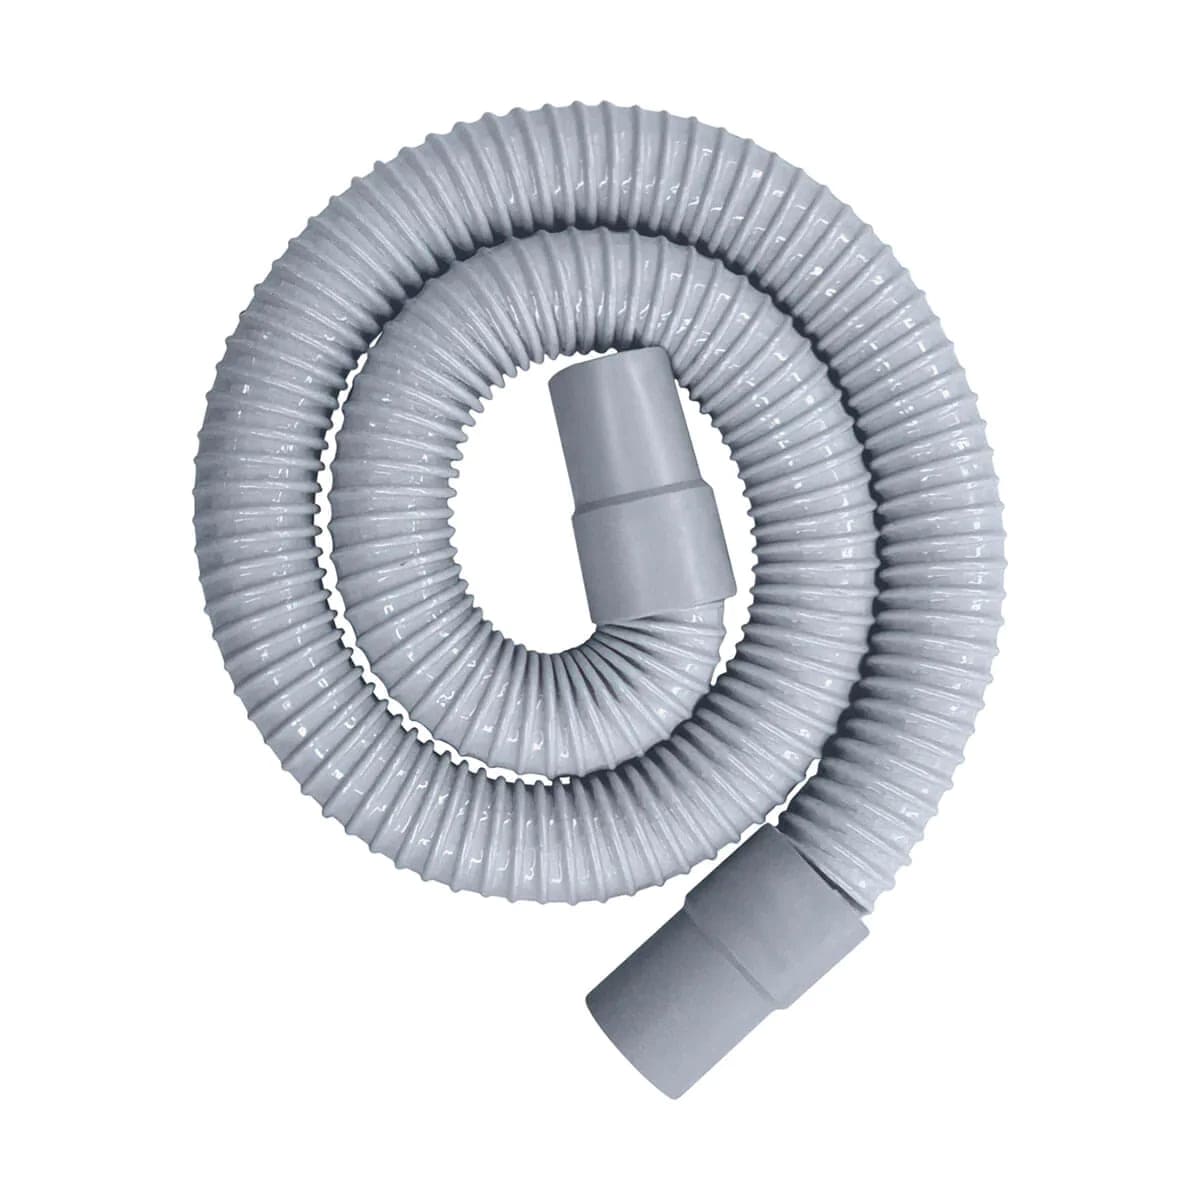 Oneida Air AXD300000 Dust Collection 1.5" x 10' Wire-Reinforced Vacuum Hose